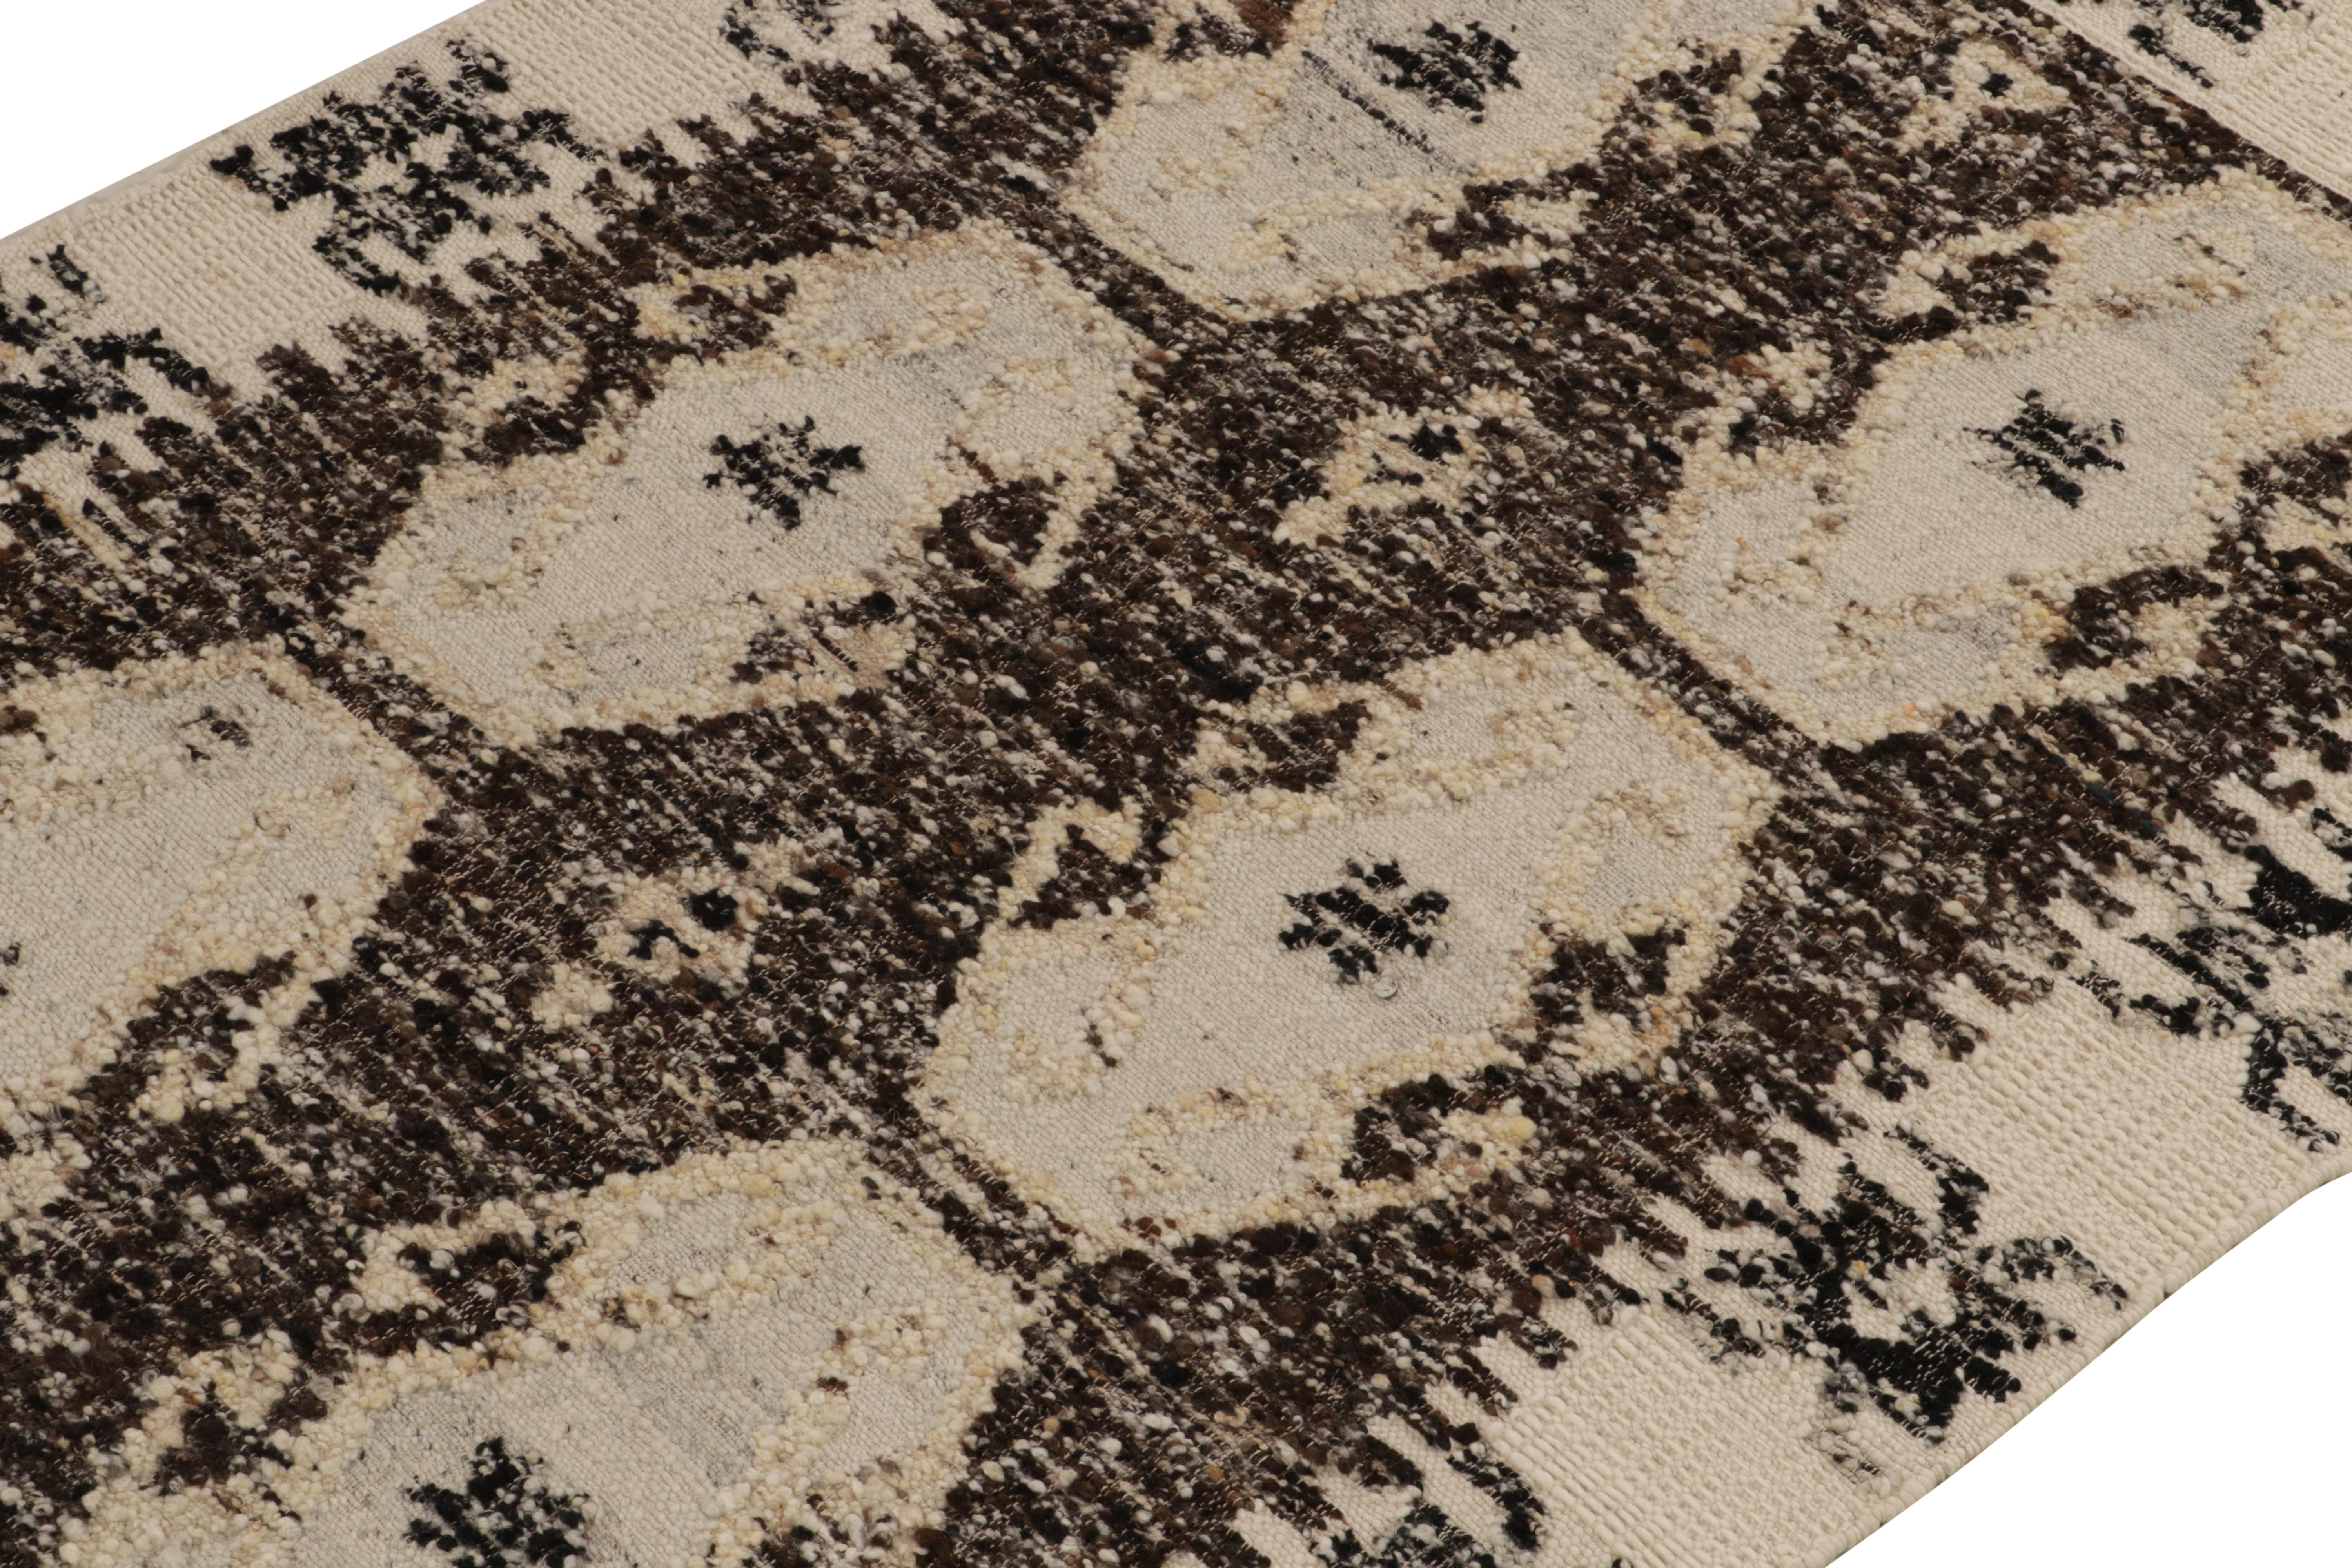 Indian Rug & Kilim's Textural Contemporary Kilim Rug in Beige-Brown, White and Black  For Sale